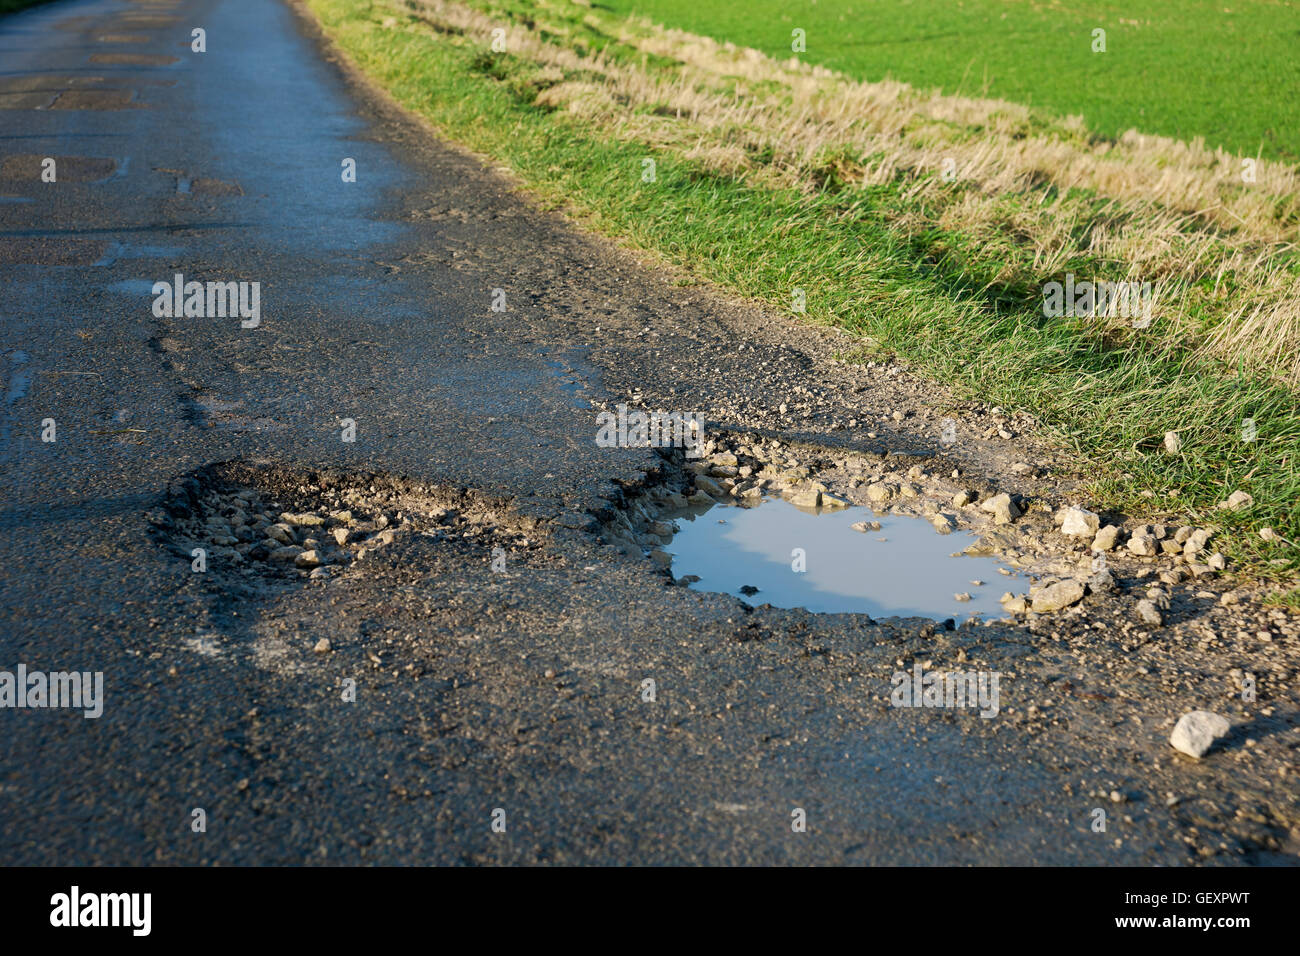 Pothole in the road filled with water. Stock Photo